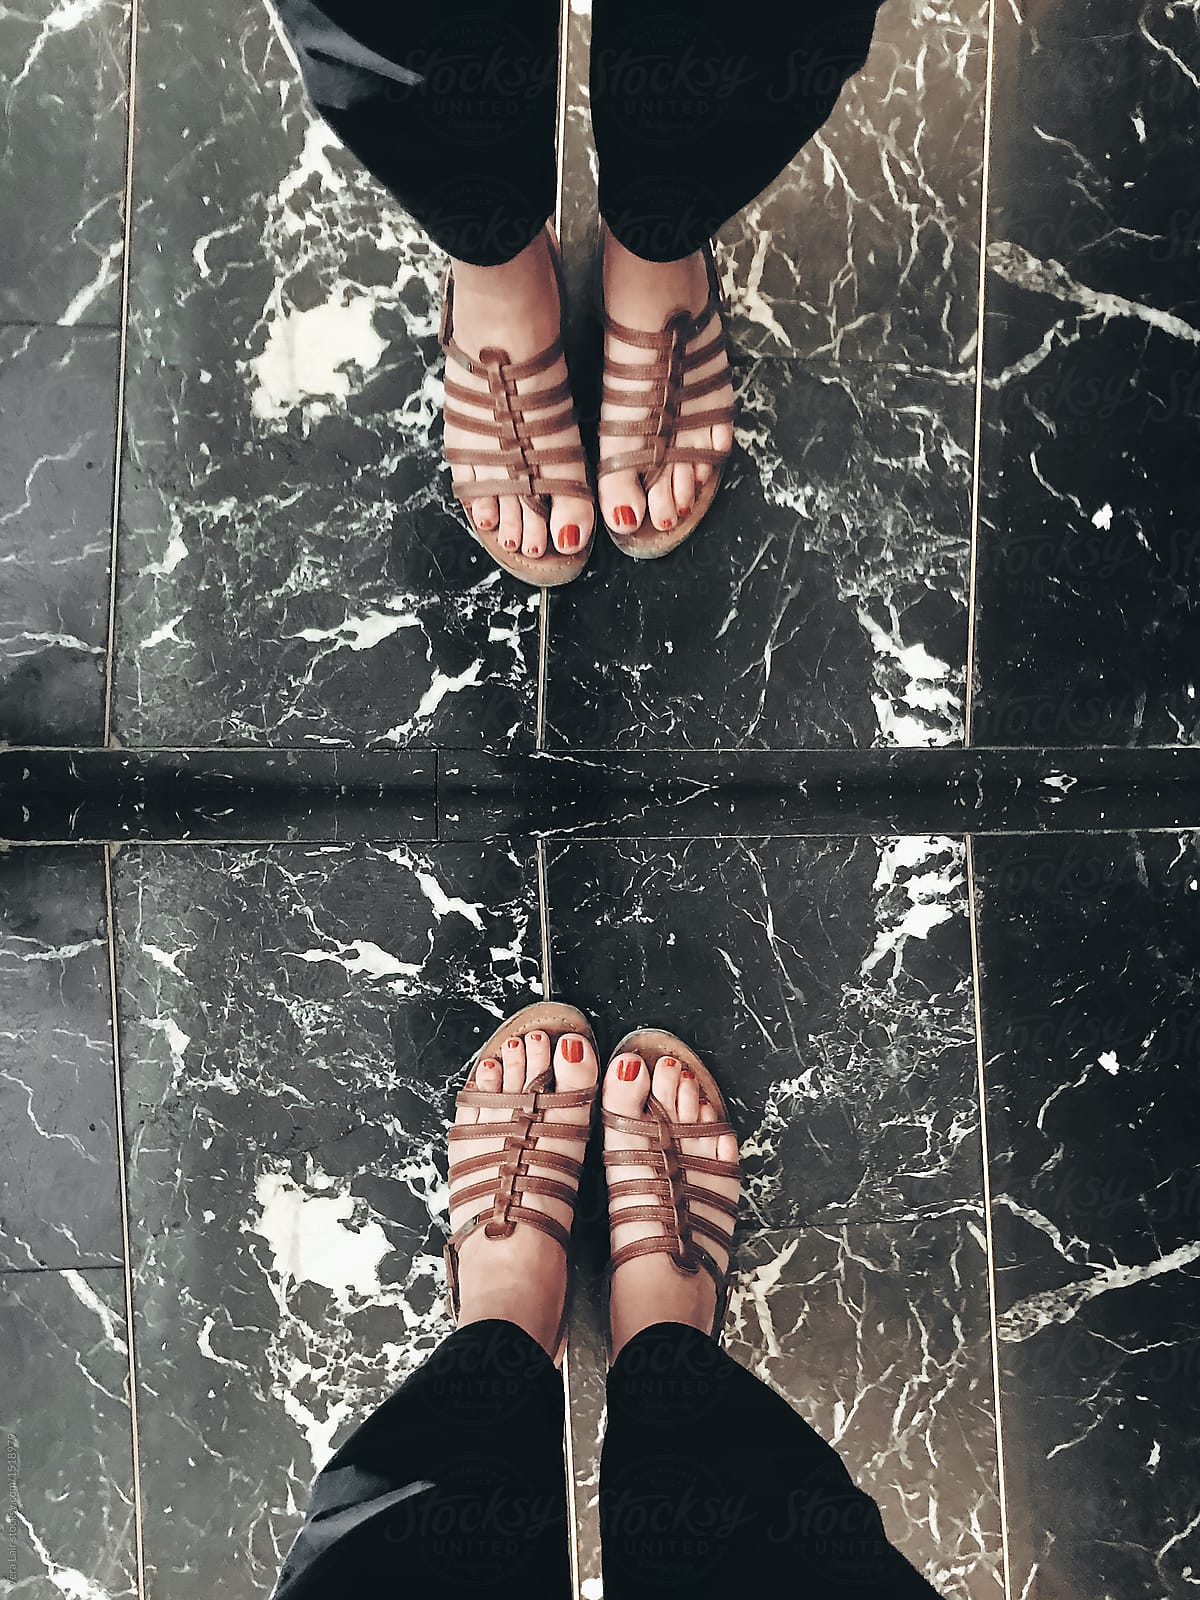 Reflection on black marble